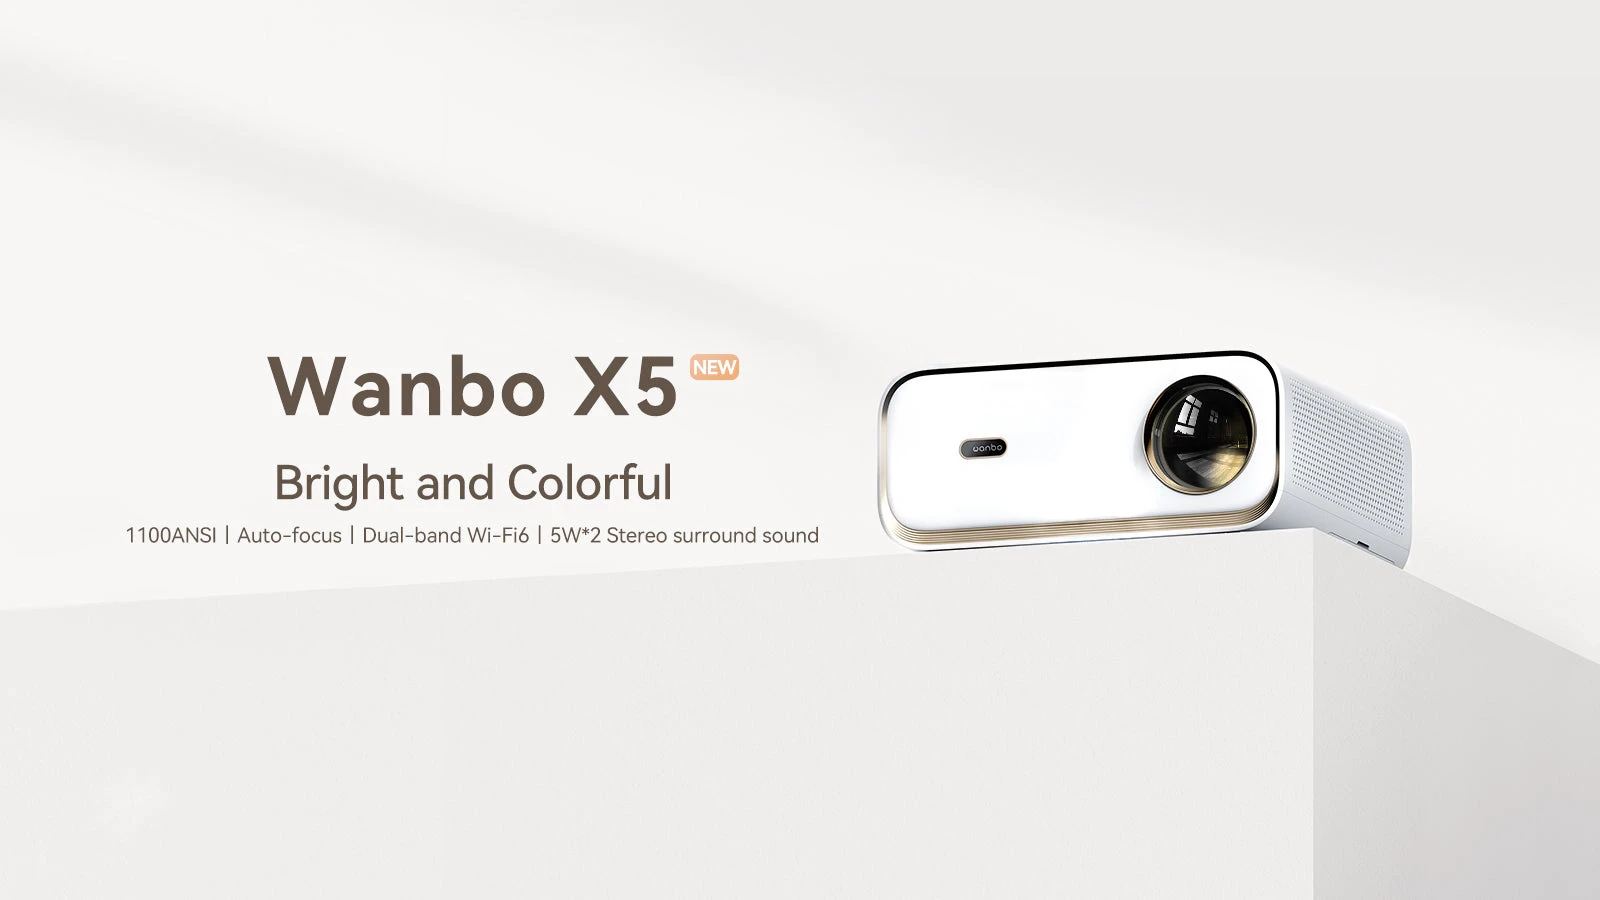 Wanbo X5 - Insanely cheap, we also get the most powerful Wanbo projector and screen as a gift